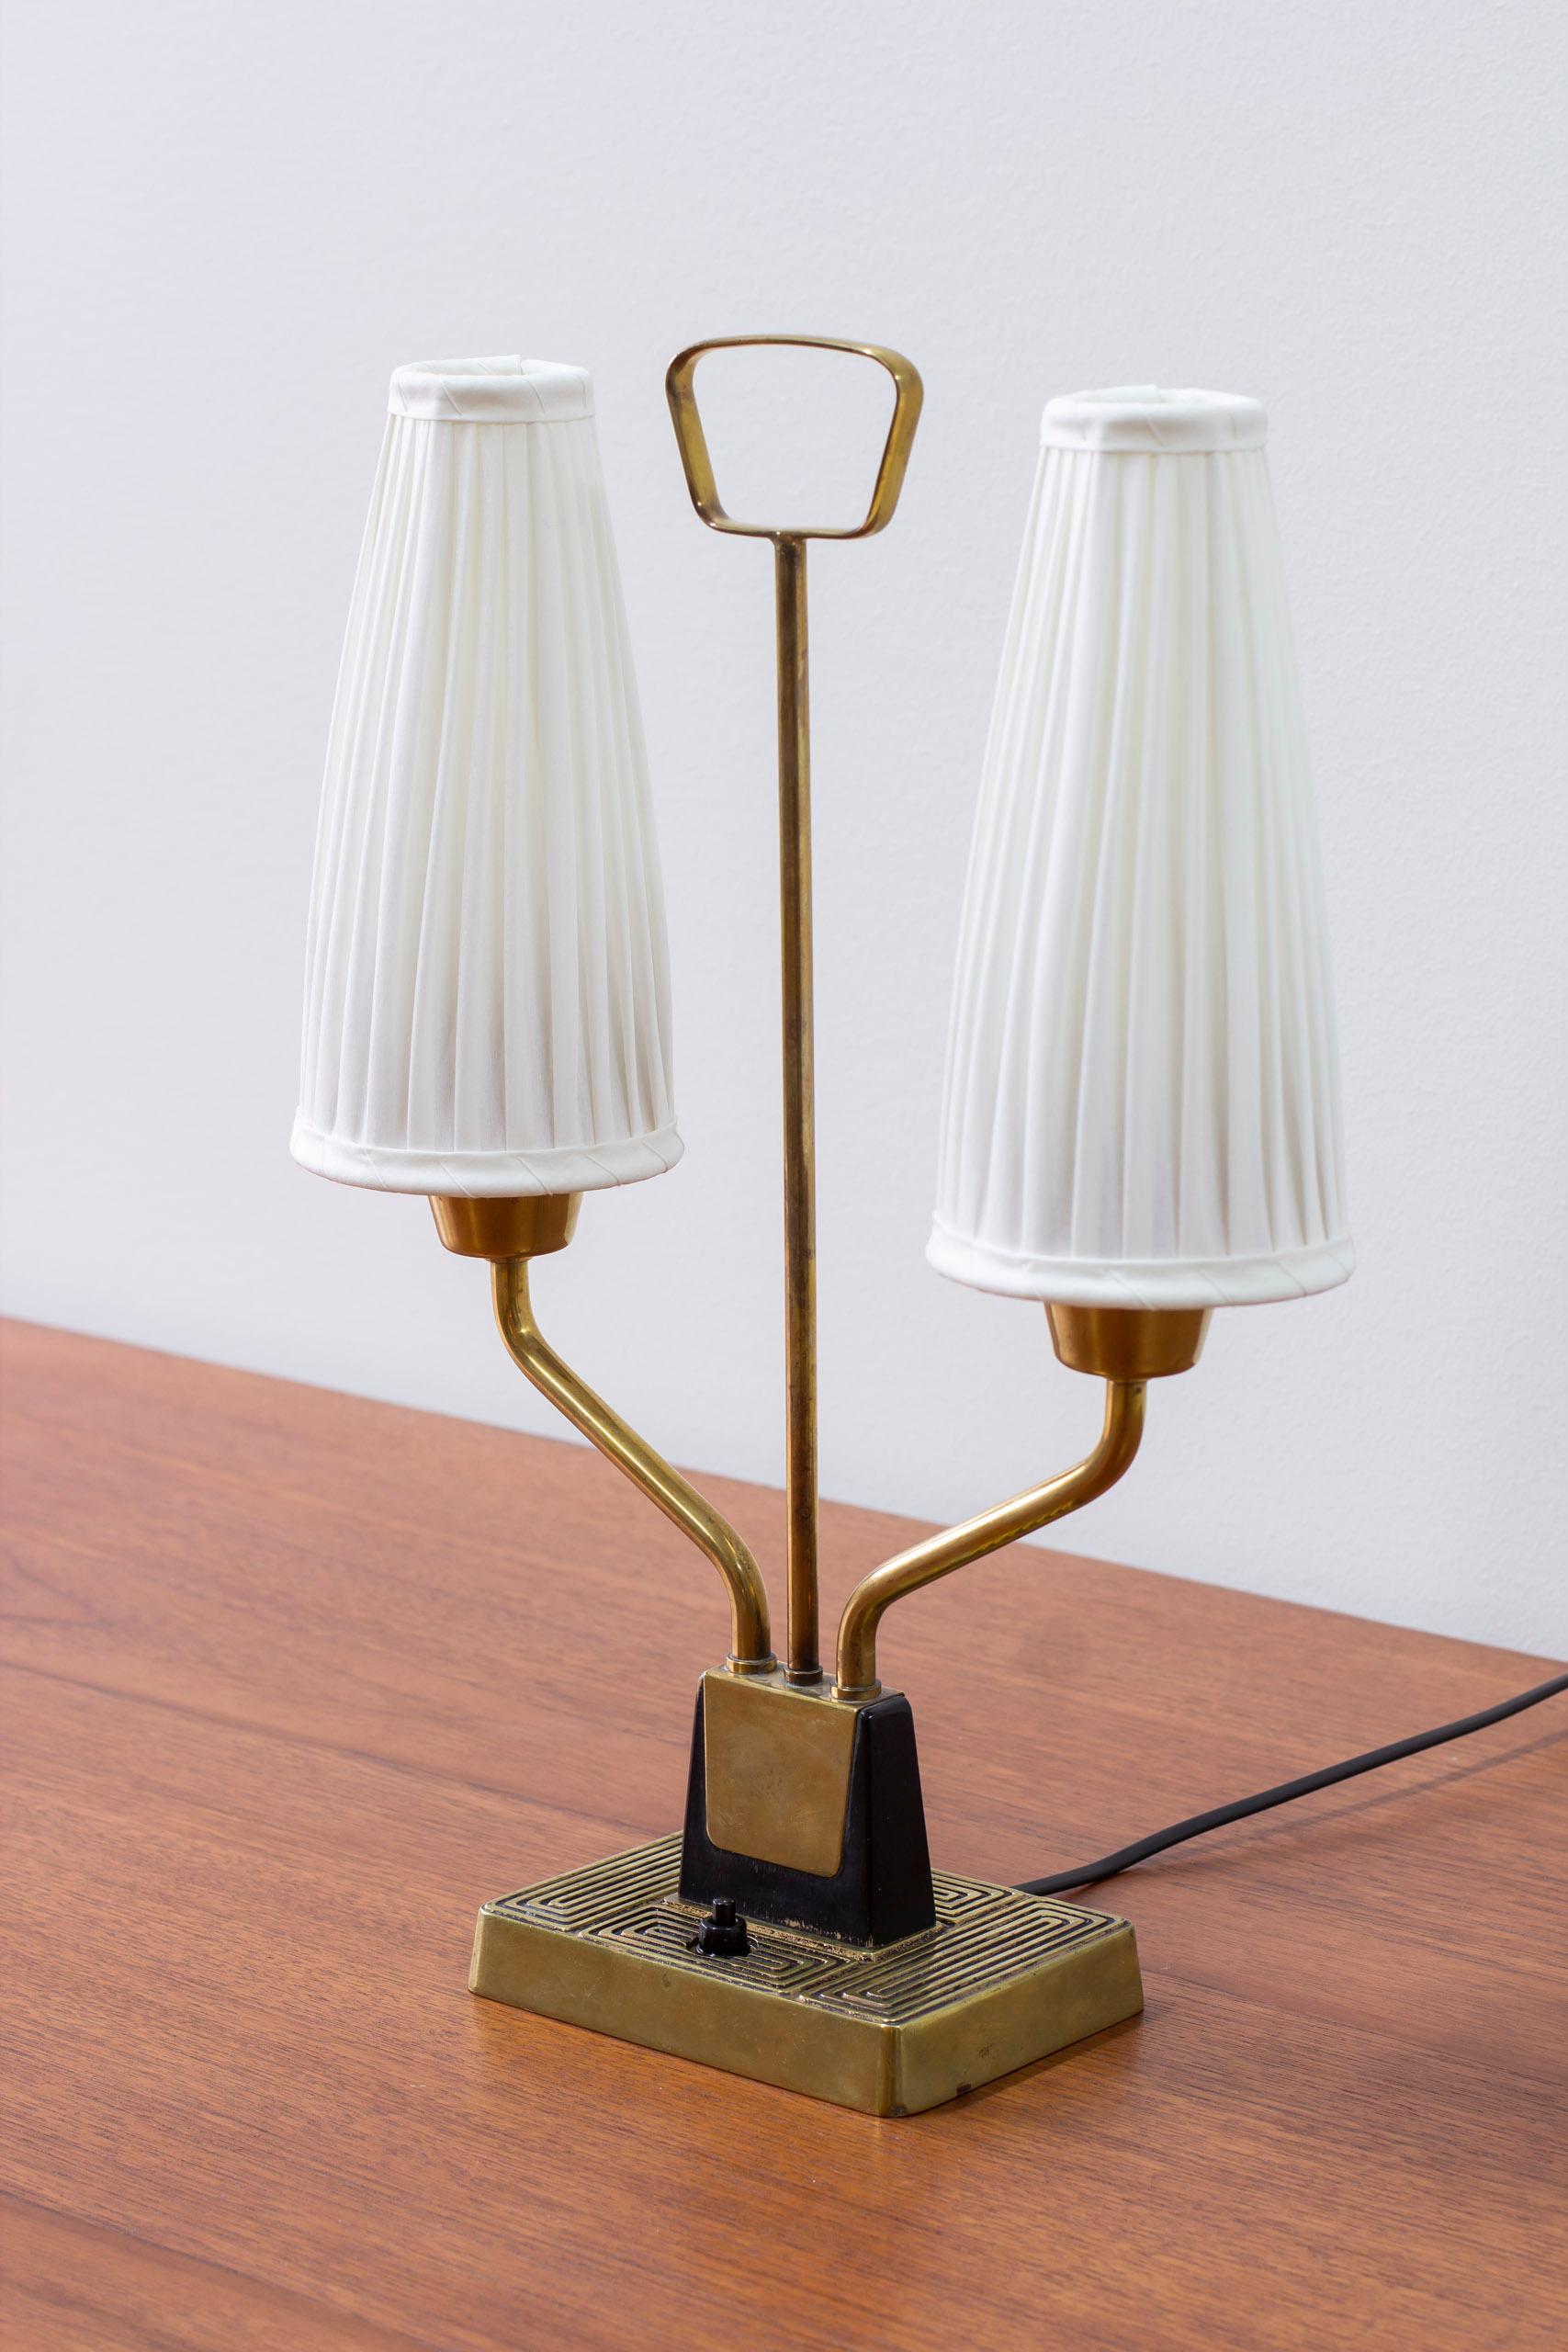 Table lamp produced in Sweden by ASEA belysning during the 1950s. Made from brass and black lacquered wood with new hand sewn lamp shades in chintz fabric. Light switch on the lamp base in working order. Very good vintage condition with light age